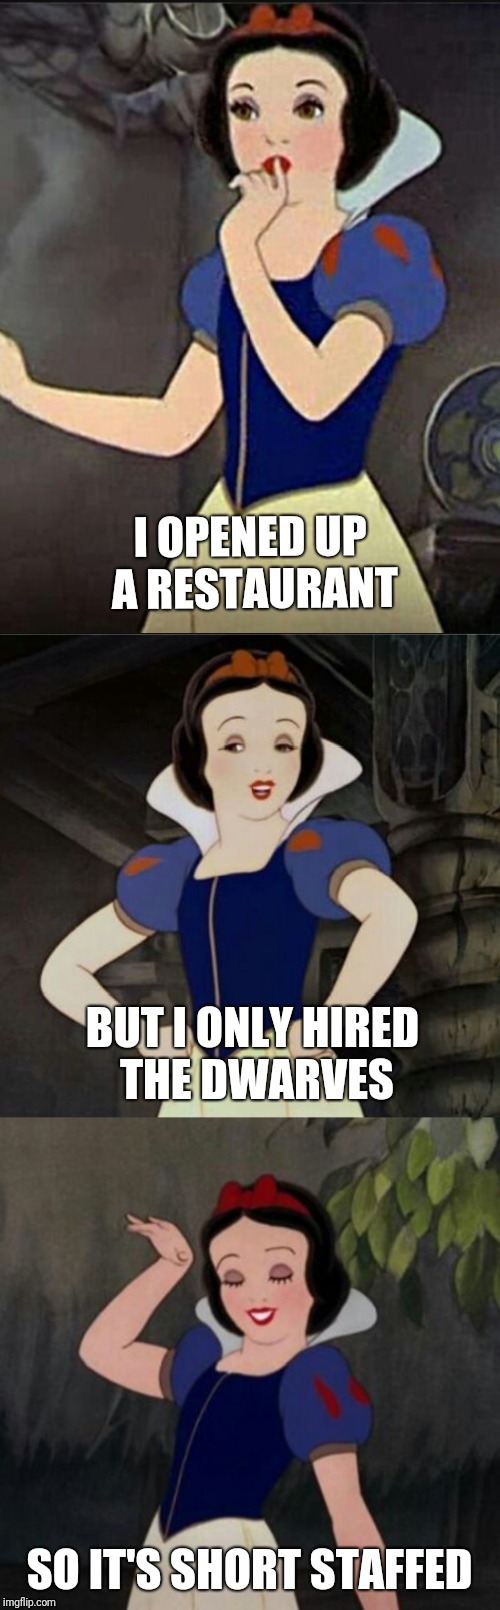 Snow White joke template | I OPENED UP A RESTAURANT; BUT I ONLY HIRED THE DWARVES; SO IT'S SHORT STAFFED | image tagged in snow white joke template,memes | made w/ Imgflip meme maker